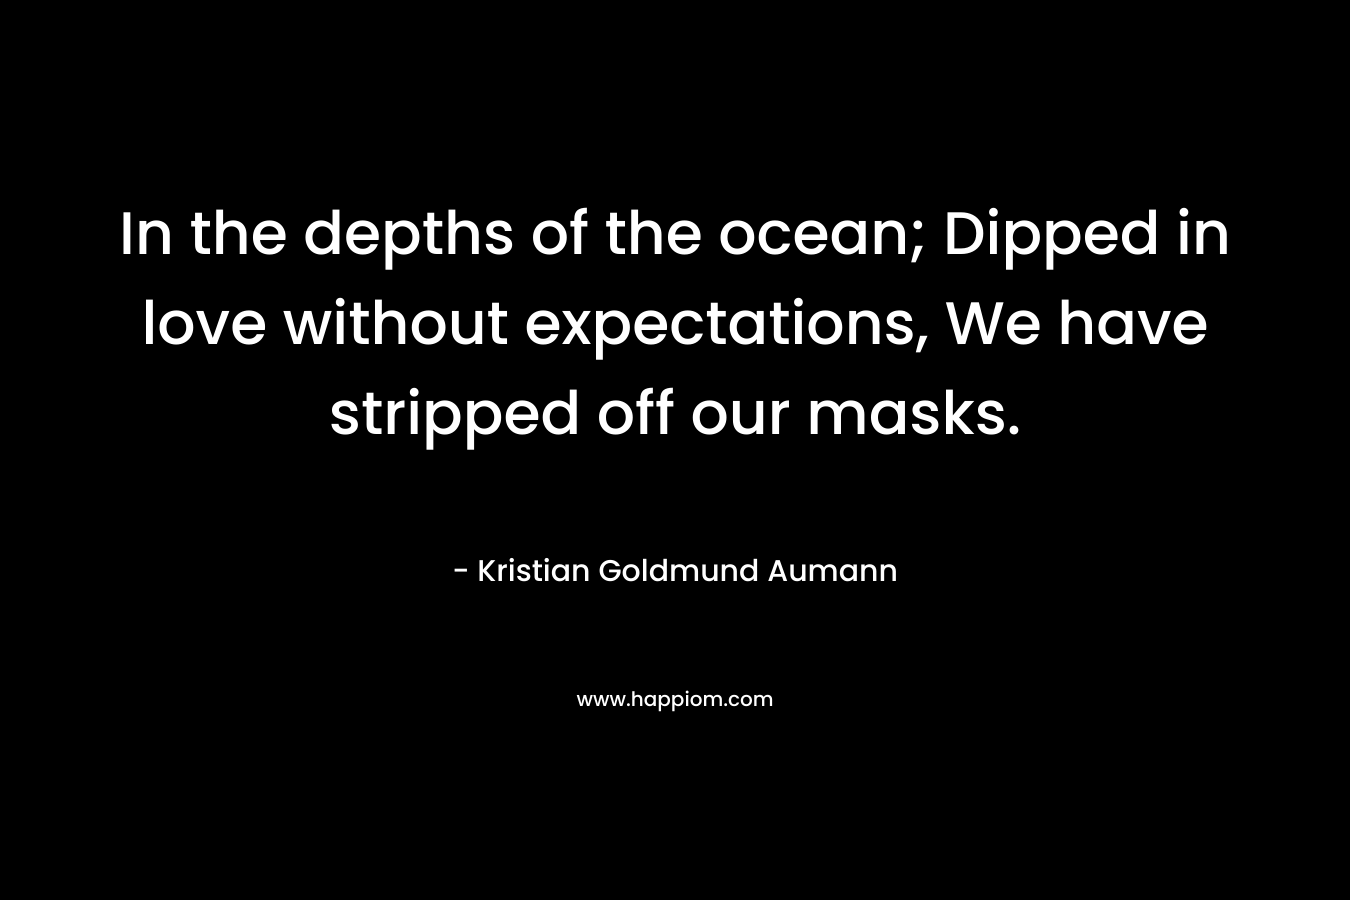 In the depths of the ocean; Dipped in love without expectations, We have stripped off our masks.